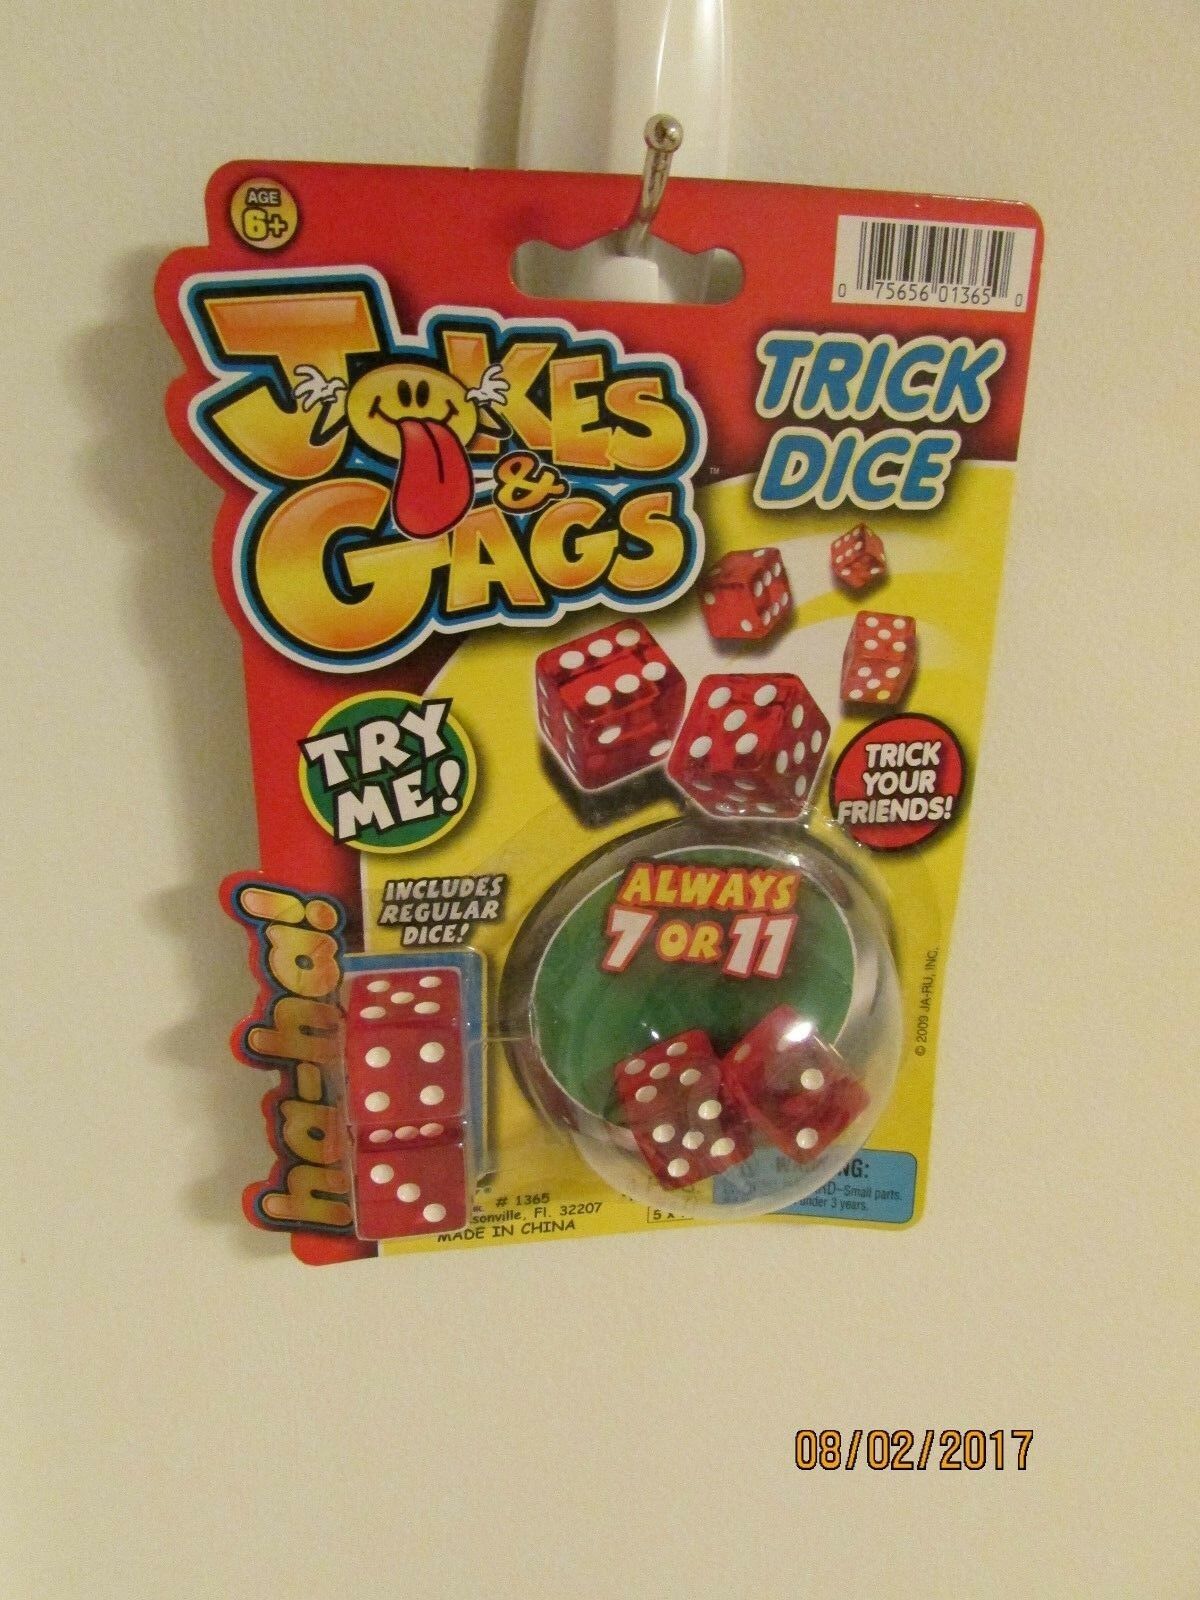 Trick Dice, Joke Gags, 4 Dices, 2 Dices Roll 7 Or 11, The Other 2 Dices Do What